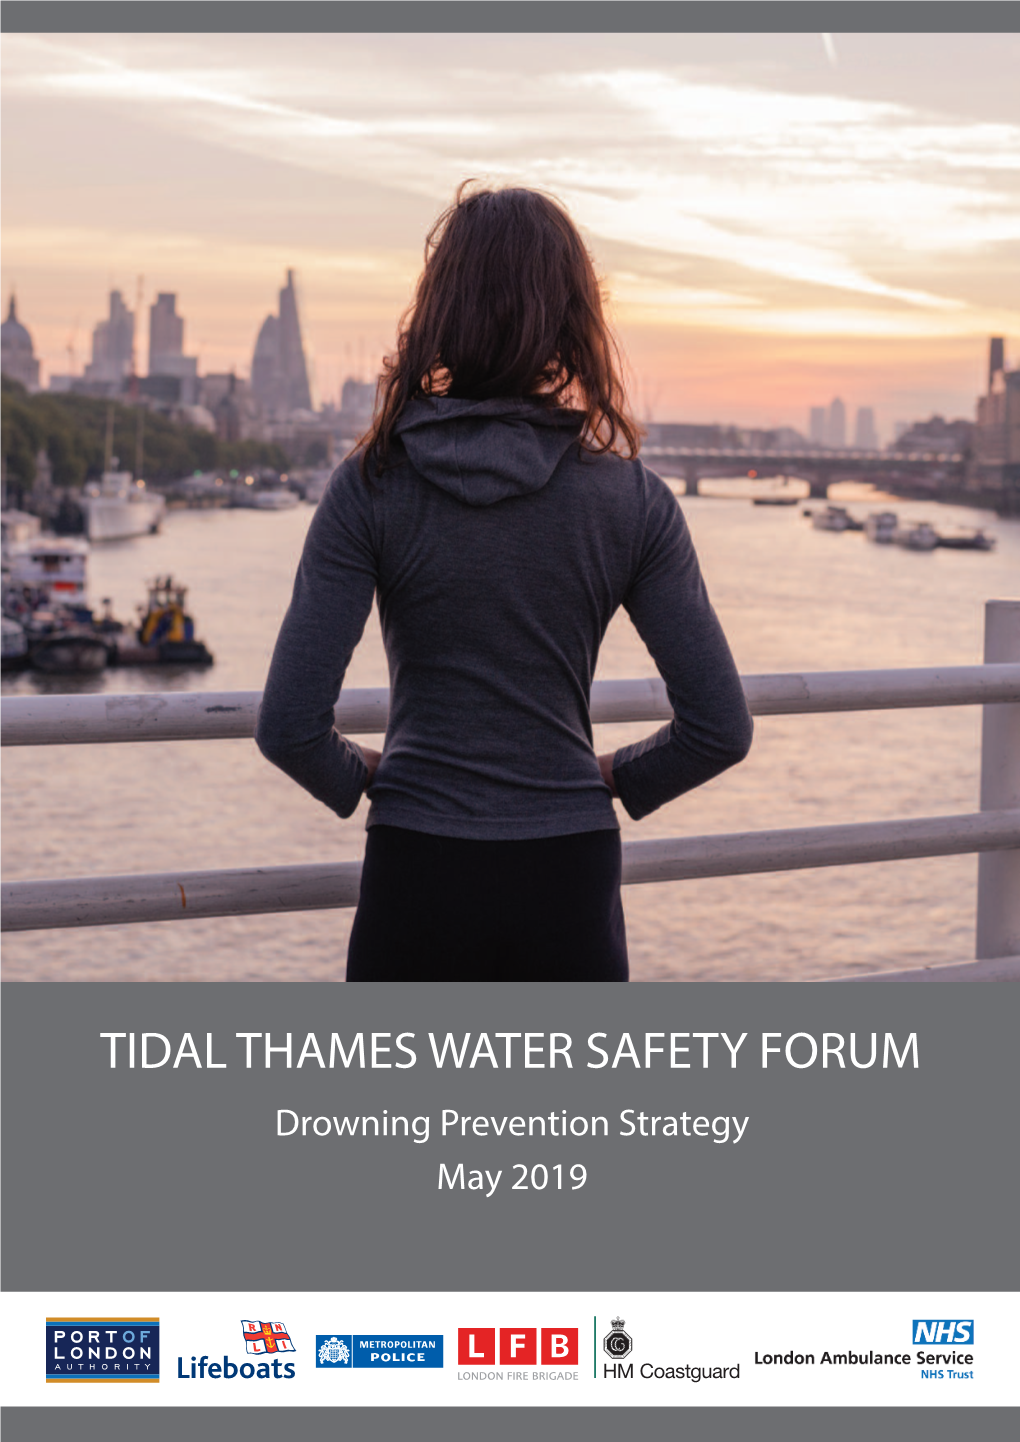 Tidal Thames Water Safety Forum